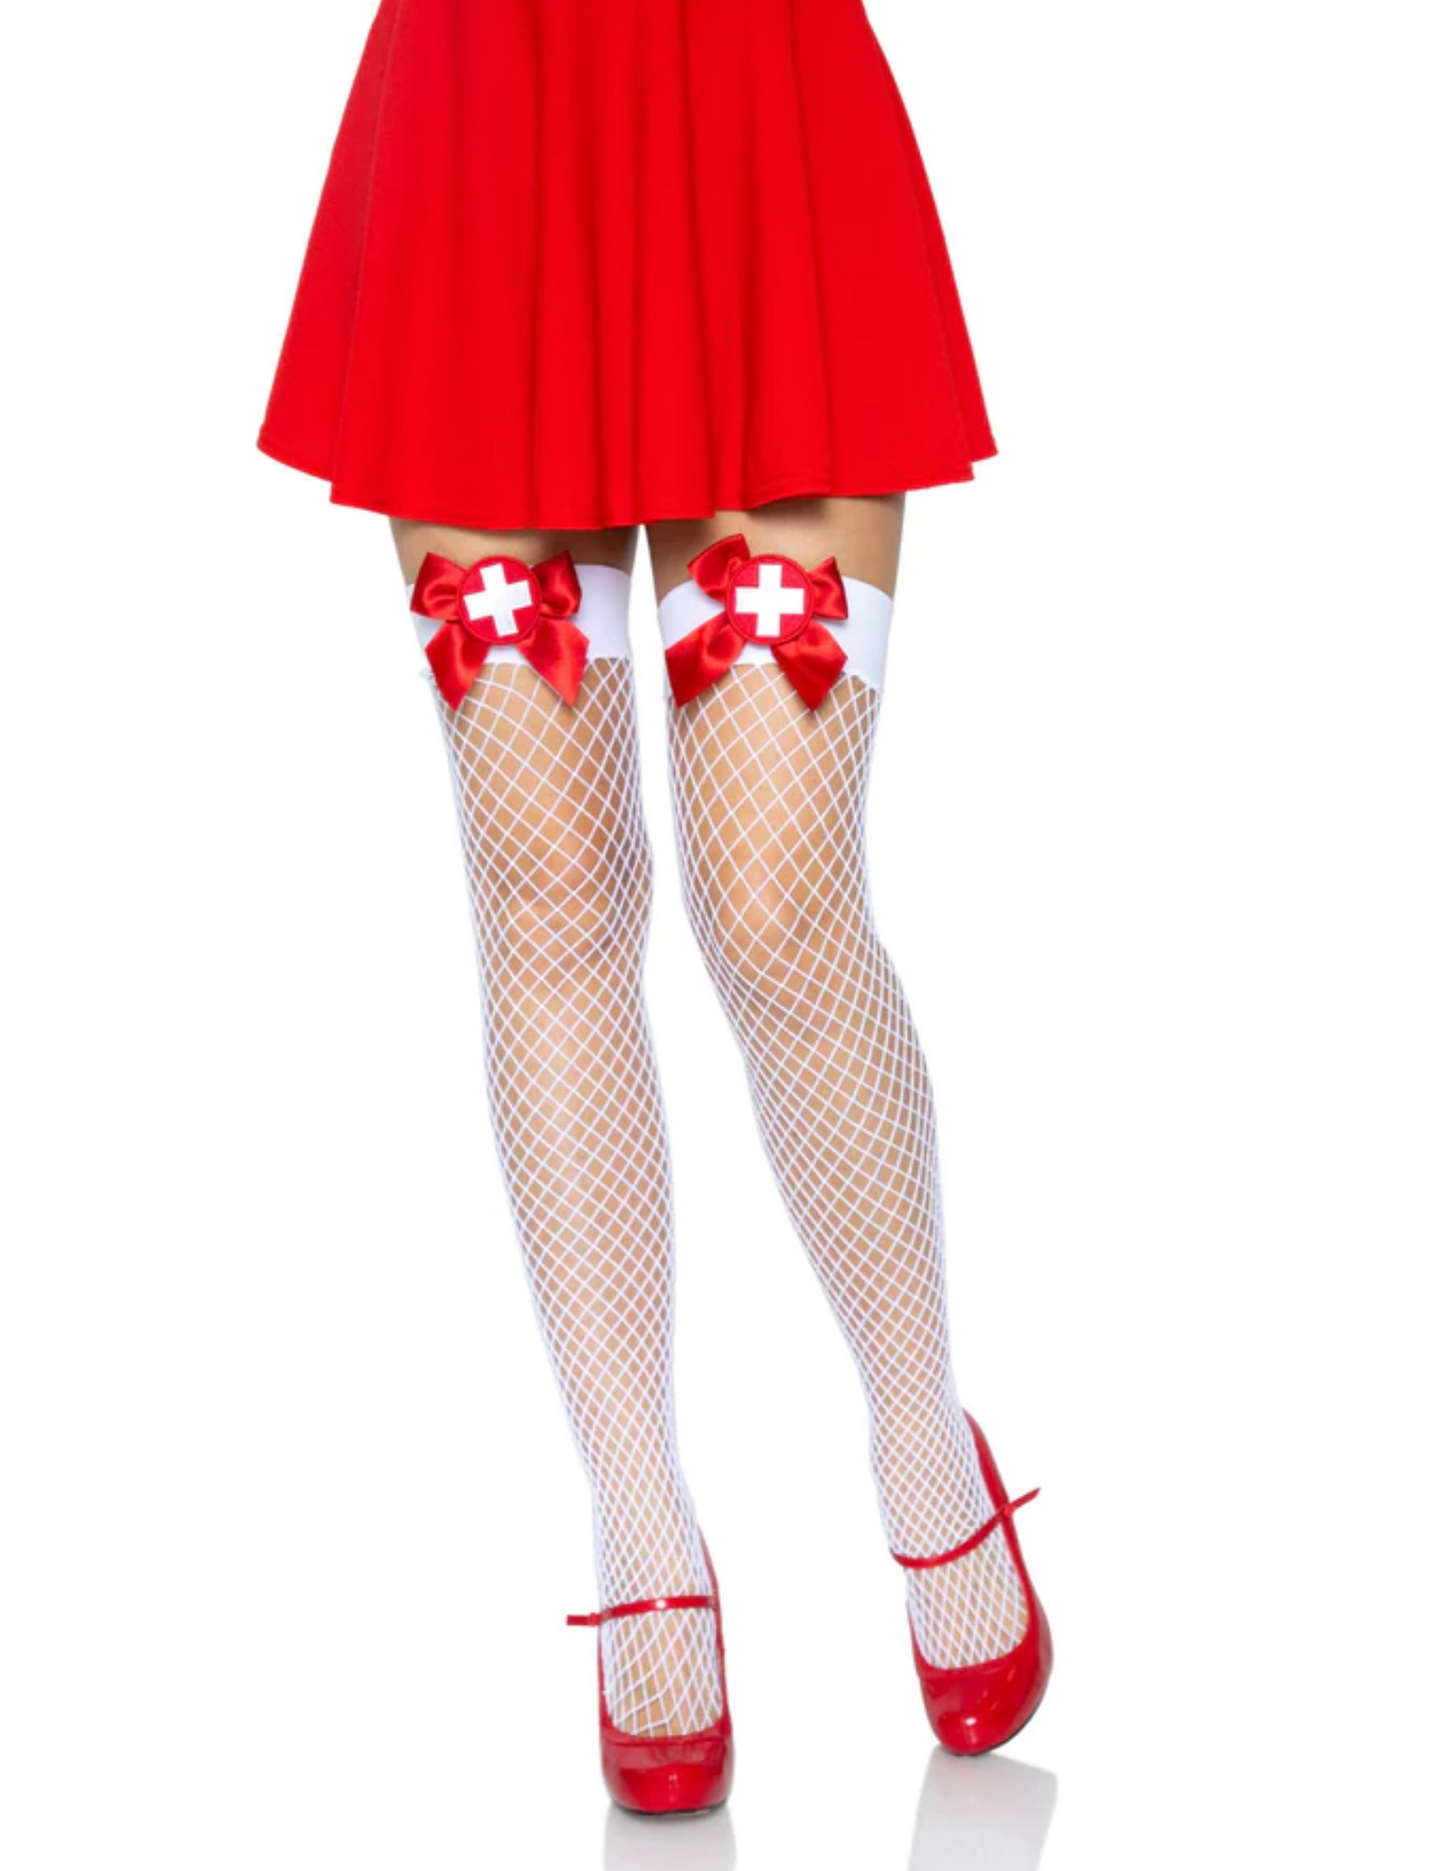 Leg Avenue nurse themed white industrial net thigh high stockings with red bows and white crosses. Front view shown with red shoes and red skirt.